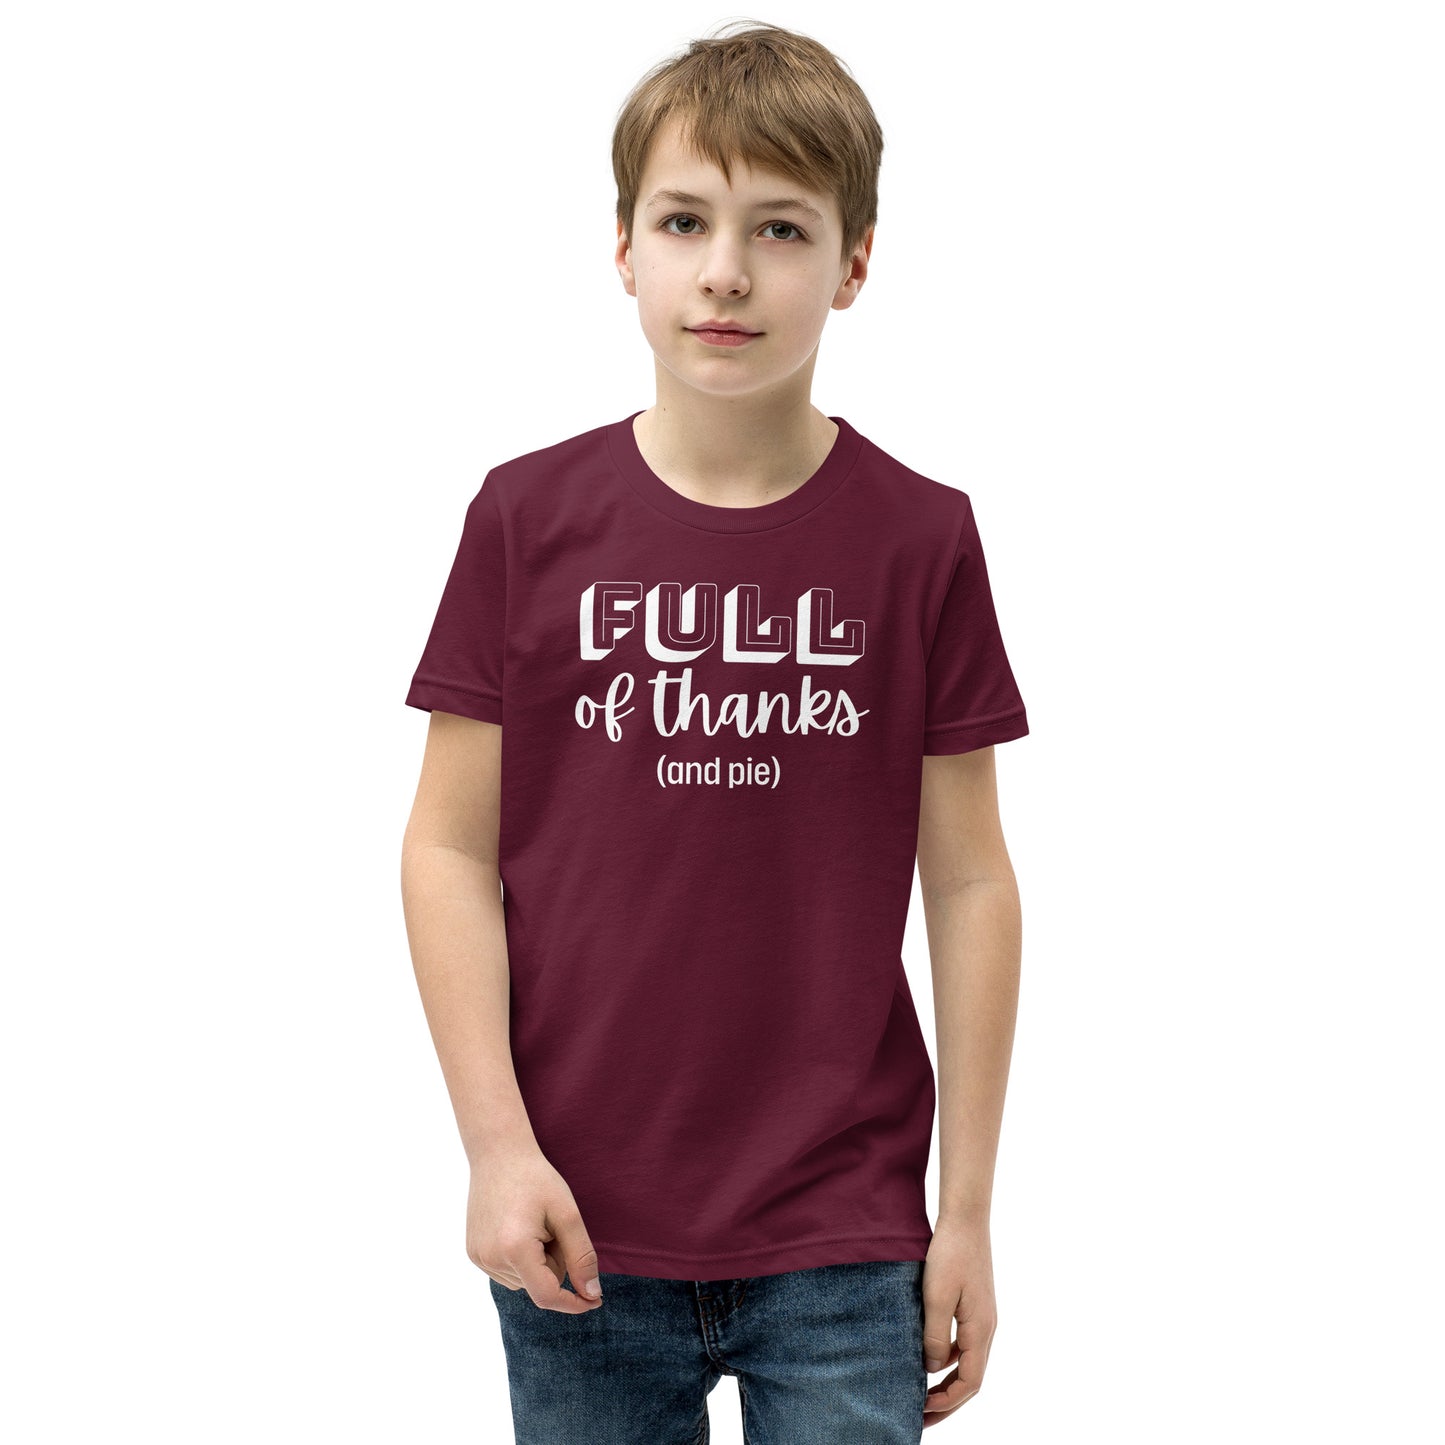 Full of thanks (and pie) Youth Thanksgiving T-Shirt